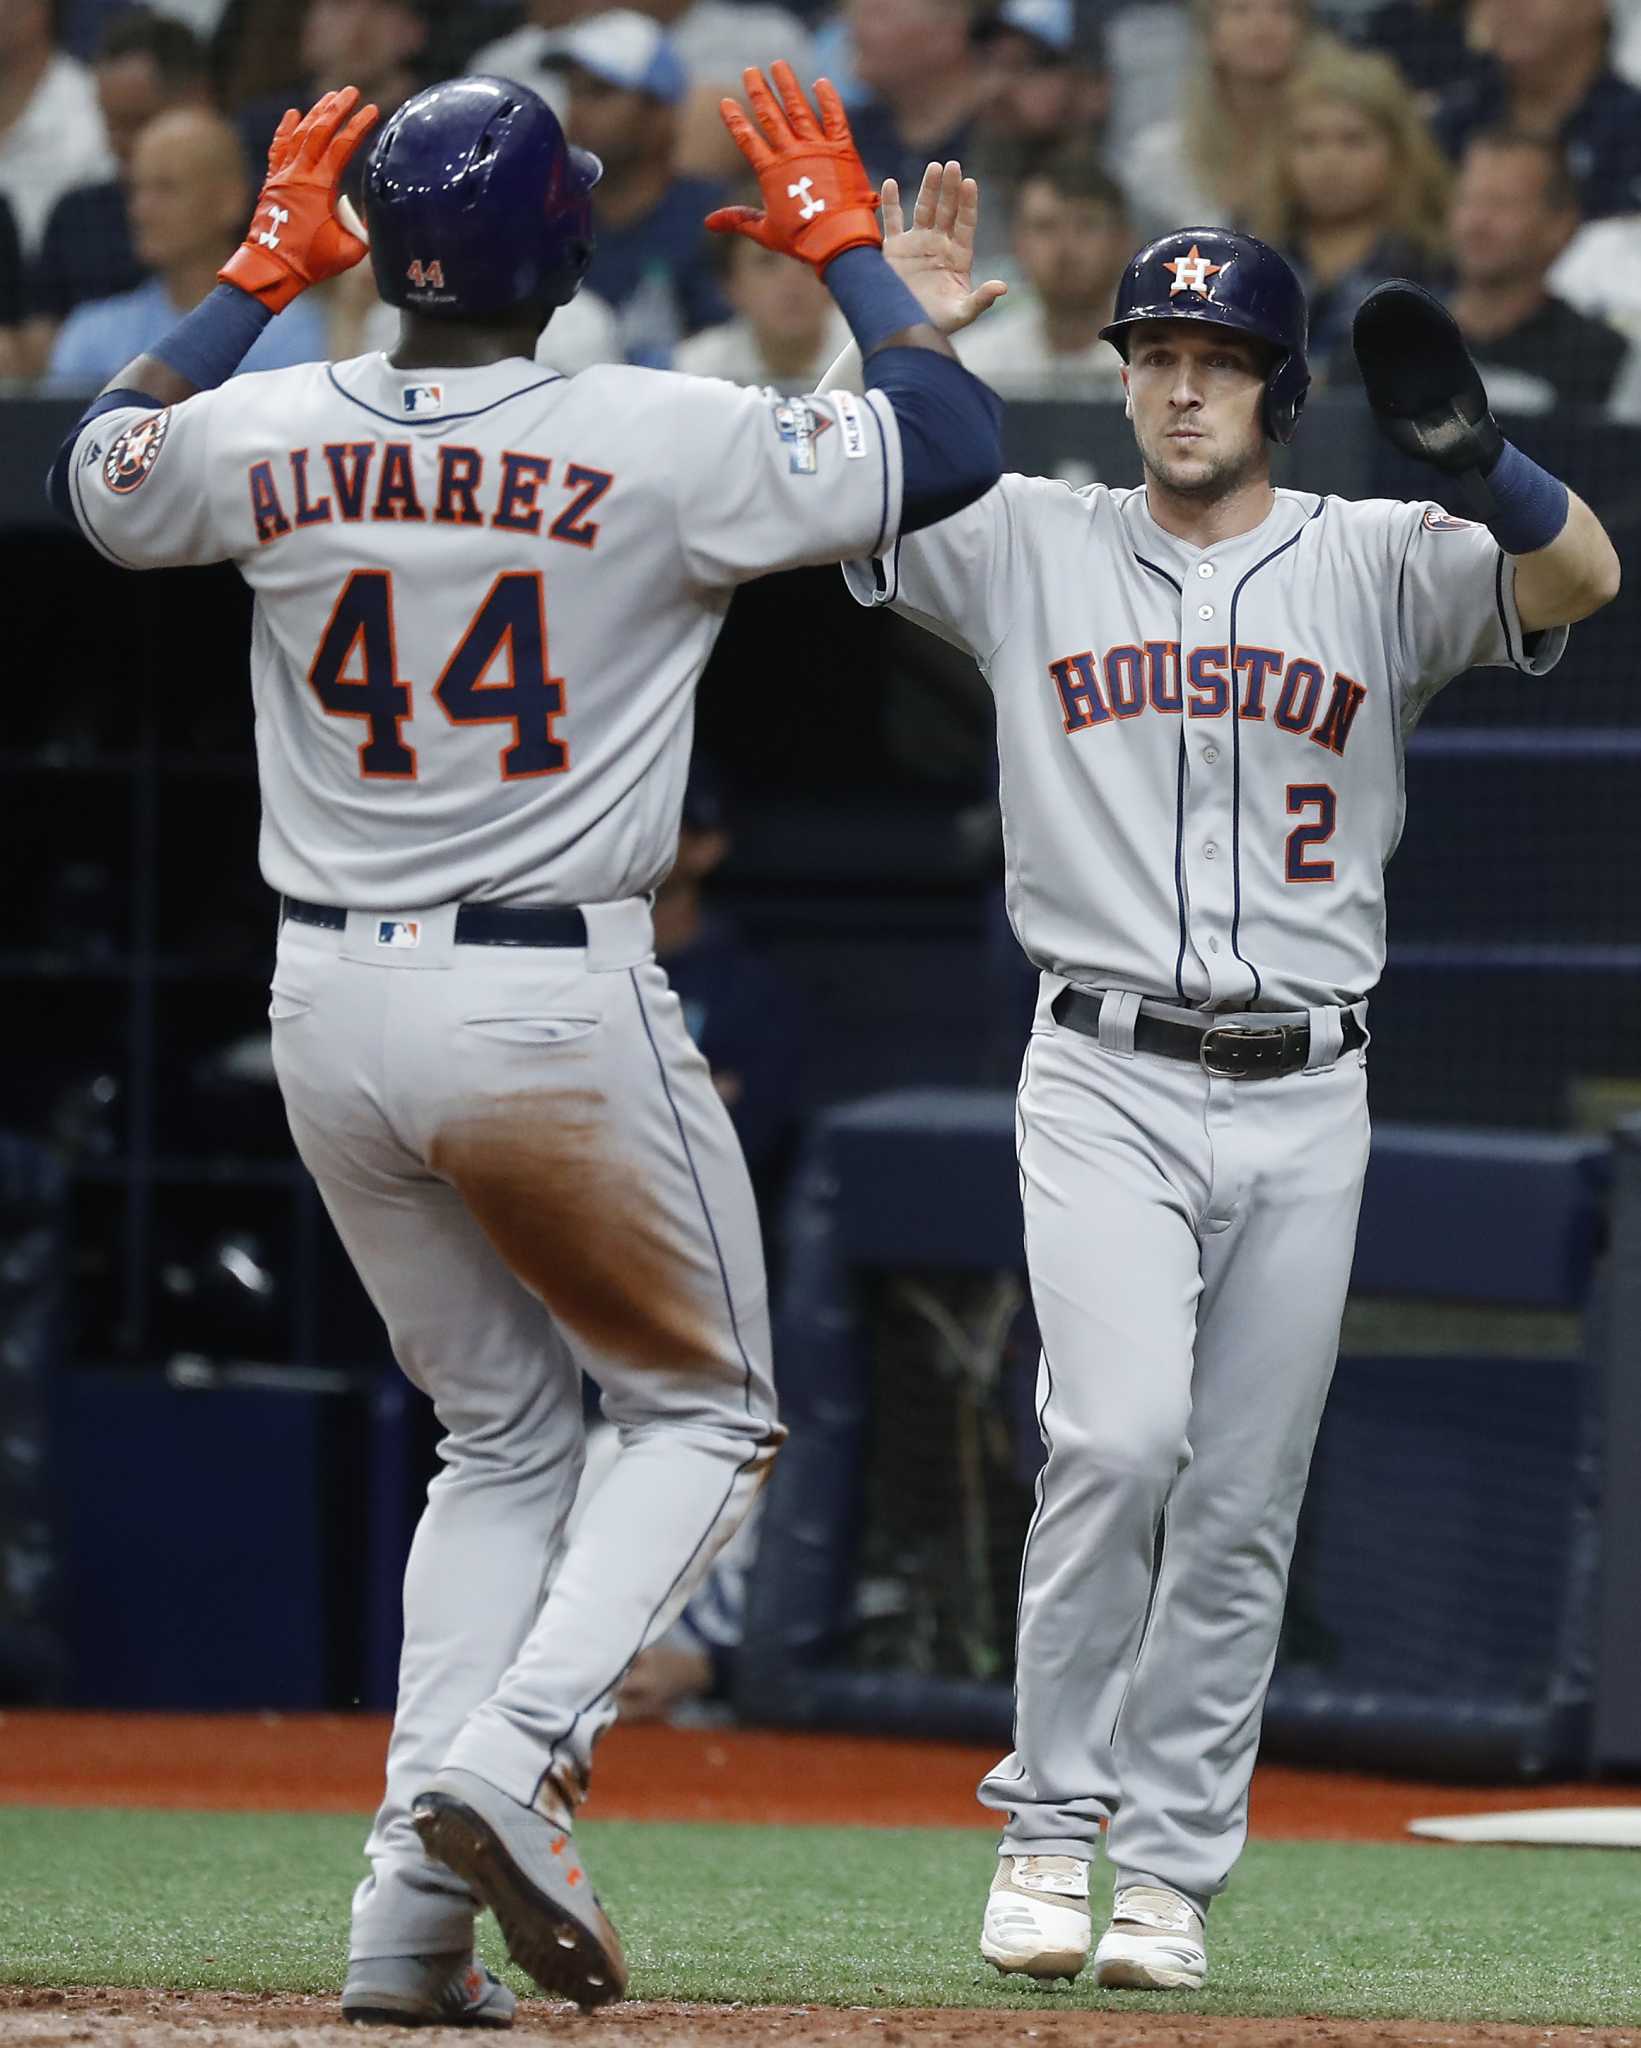 Creech: Astros must find a solution, close out series